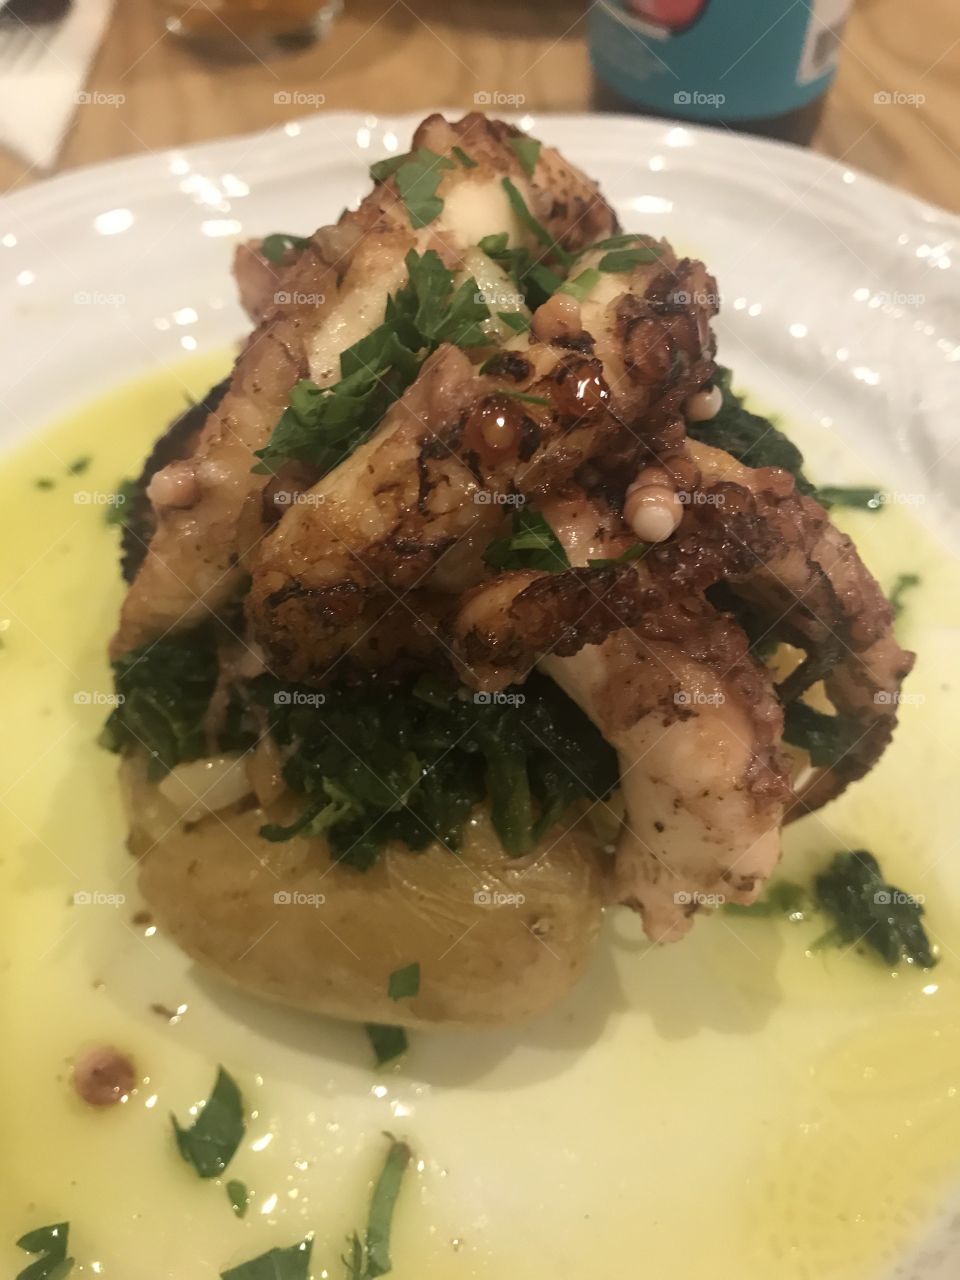 Octopus dinner with potato in Portugal. PORTUGUESE food. 